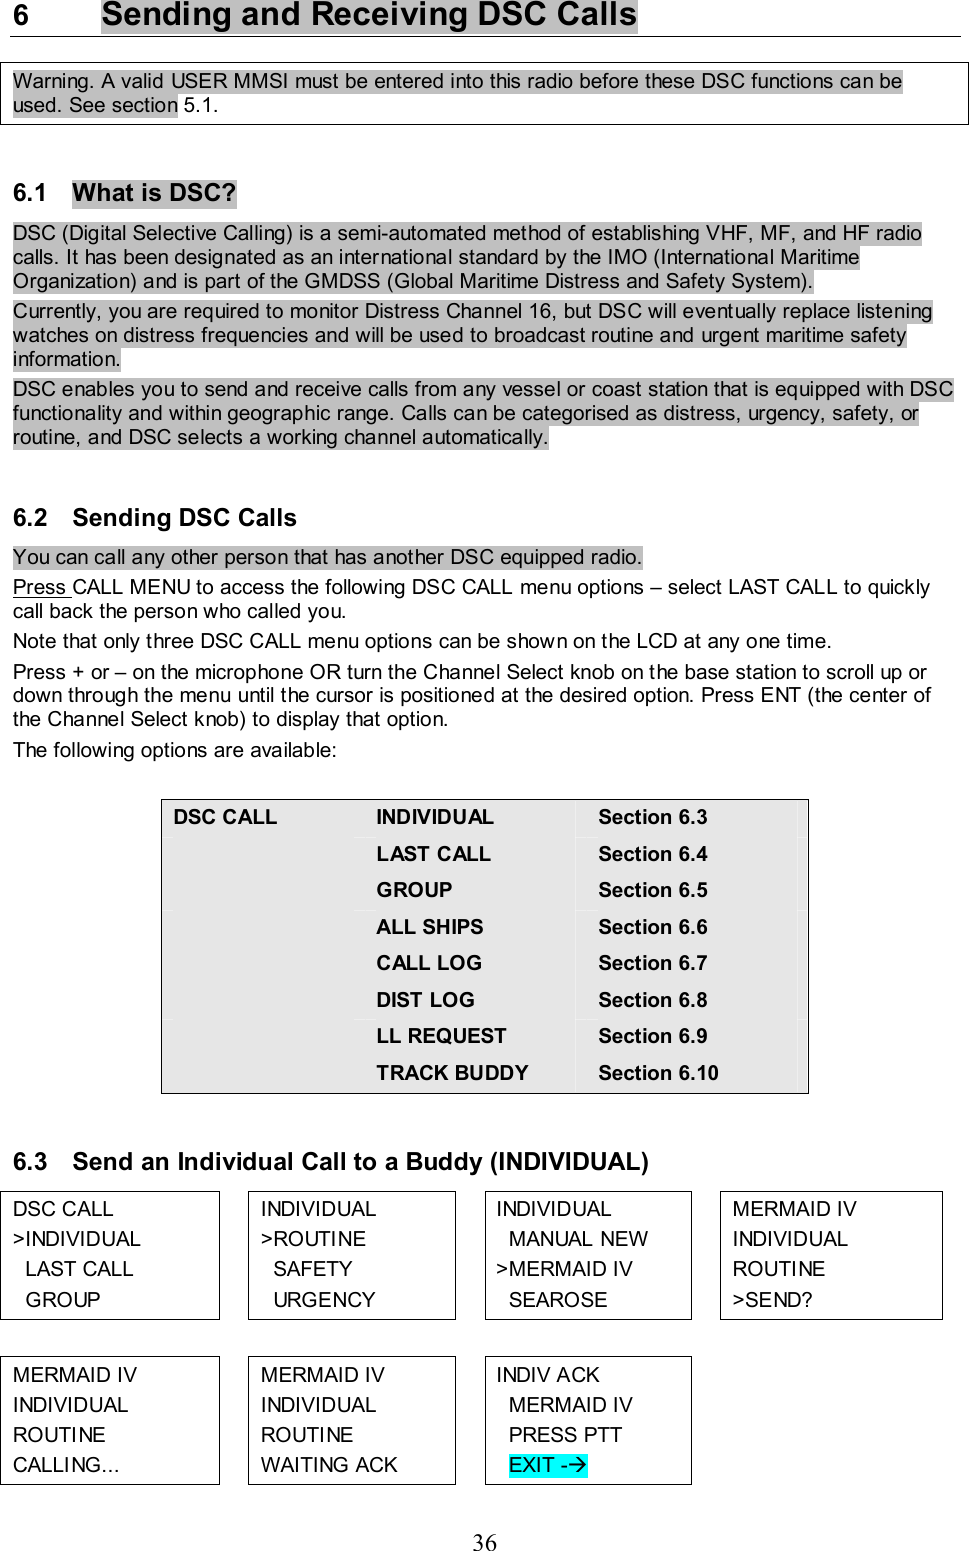 36 6  Sending and Receiving DSC Calls  Warning. A valid USER MMSI must be entered into this radio before these DSC functions can be used. See section 5.1.  6.1  What is DSC?  DSC (Digital Selective Calling) is a semi-automated method of establishing VHF, MF, and HF radio calls. It has been designated as an international standard by the IMO (International Maritime Organization) and is part of the GMDSS (Global Maritime Distress and Safety System).  Currently, you are required to monitor Distress Channel 16, but DSC will eventually replace listening watches on distress frequencies and will be used to broadcast routine and urgent maritime safety information.  DSC enables you to send and receive calls from any vessel or coast station that is equipped with DSC functionality and within geographic range. Calls can be categorised as distress, urgency, safety, or routine, and DSC selects a working channel automatically.   6.2  Sending DSC Calls You can call any other person that has another DSC equipped radio. Press CALL MENU to access the following DSC CALL menu options – select LAST CALL to quickly call back the person who called you. Note that only three DSC CALL menu options can be shown on the LCD at any one time.  Press + or – on the microphone OR turn the Channel Select knob on the base station to scroll up or down through the menu until the cursor is positioned at the desired option. Press ENT (the center of the Channel Select knob) to display that option. The following options are available:  DSC CALL INDIVIDUAL  Section 6.3  LAST CALL  Section 6.4  GROUP  Section 6.5  ALL SHIPS  Section 6.6  CALL LOG  Section 6.7  DIST LOG  Section 6.8  LL REQUEST  Section 6.9  TRACK BUDDY  Section 6.10  6.3  Send an Individual Call to a Buddy (INDIVIDUAL) DSC CALL  &gt;INDIVIDUAL    LAST CALL    GROUP  INDIVIDUAL  &gt;ROUTINE    SAFETY    URGENCY  INDIVIDUAL   MANUAL NEW &gt;MERMAID IV   SEAROSE   MERMAID IV  INDIVIDUAL  ROUTINE  &gt;SEND?            MERMAID IV  INDIVIDUAL  ROUTINE  CALLING...   MERMAID IV  INDIVIDUAL  ROUTINE  WAITING ACK  INDIV ACK   MERMAID IV   PRESS PTT   EXIT -Æ   